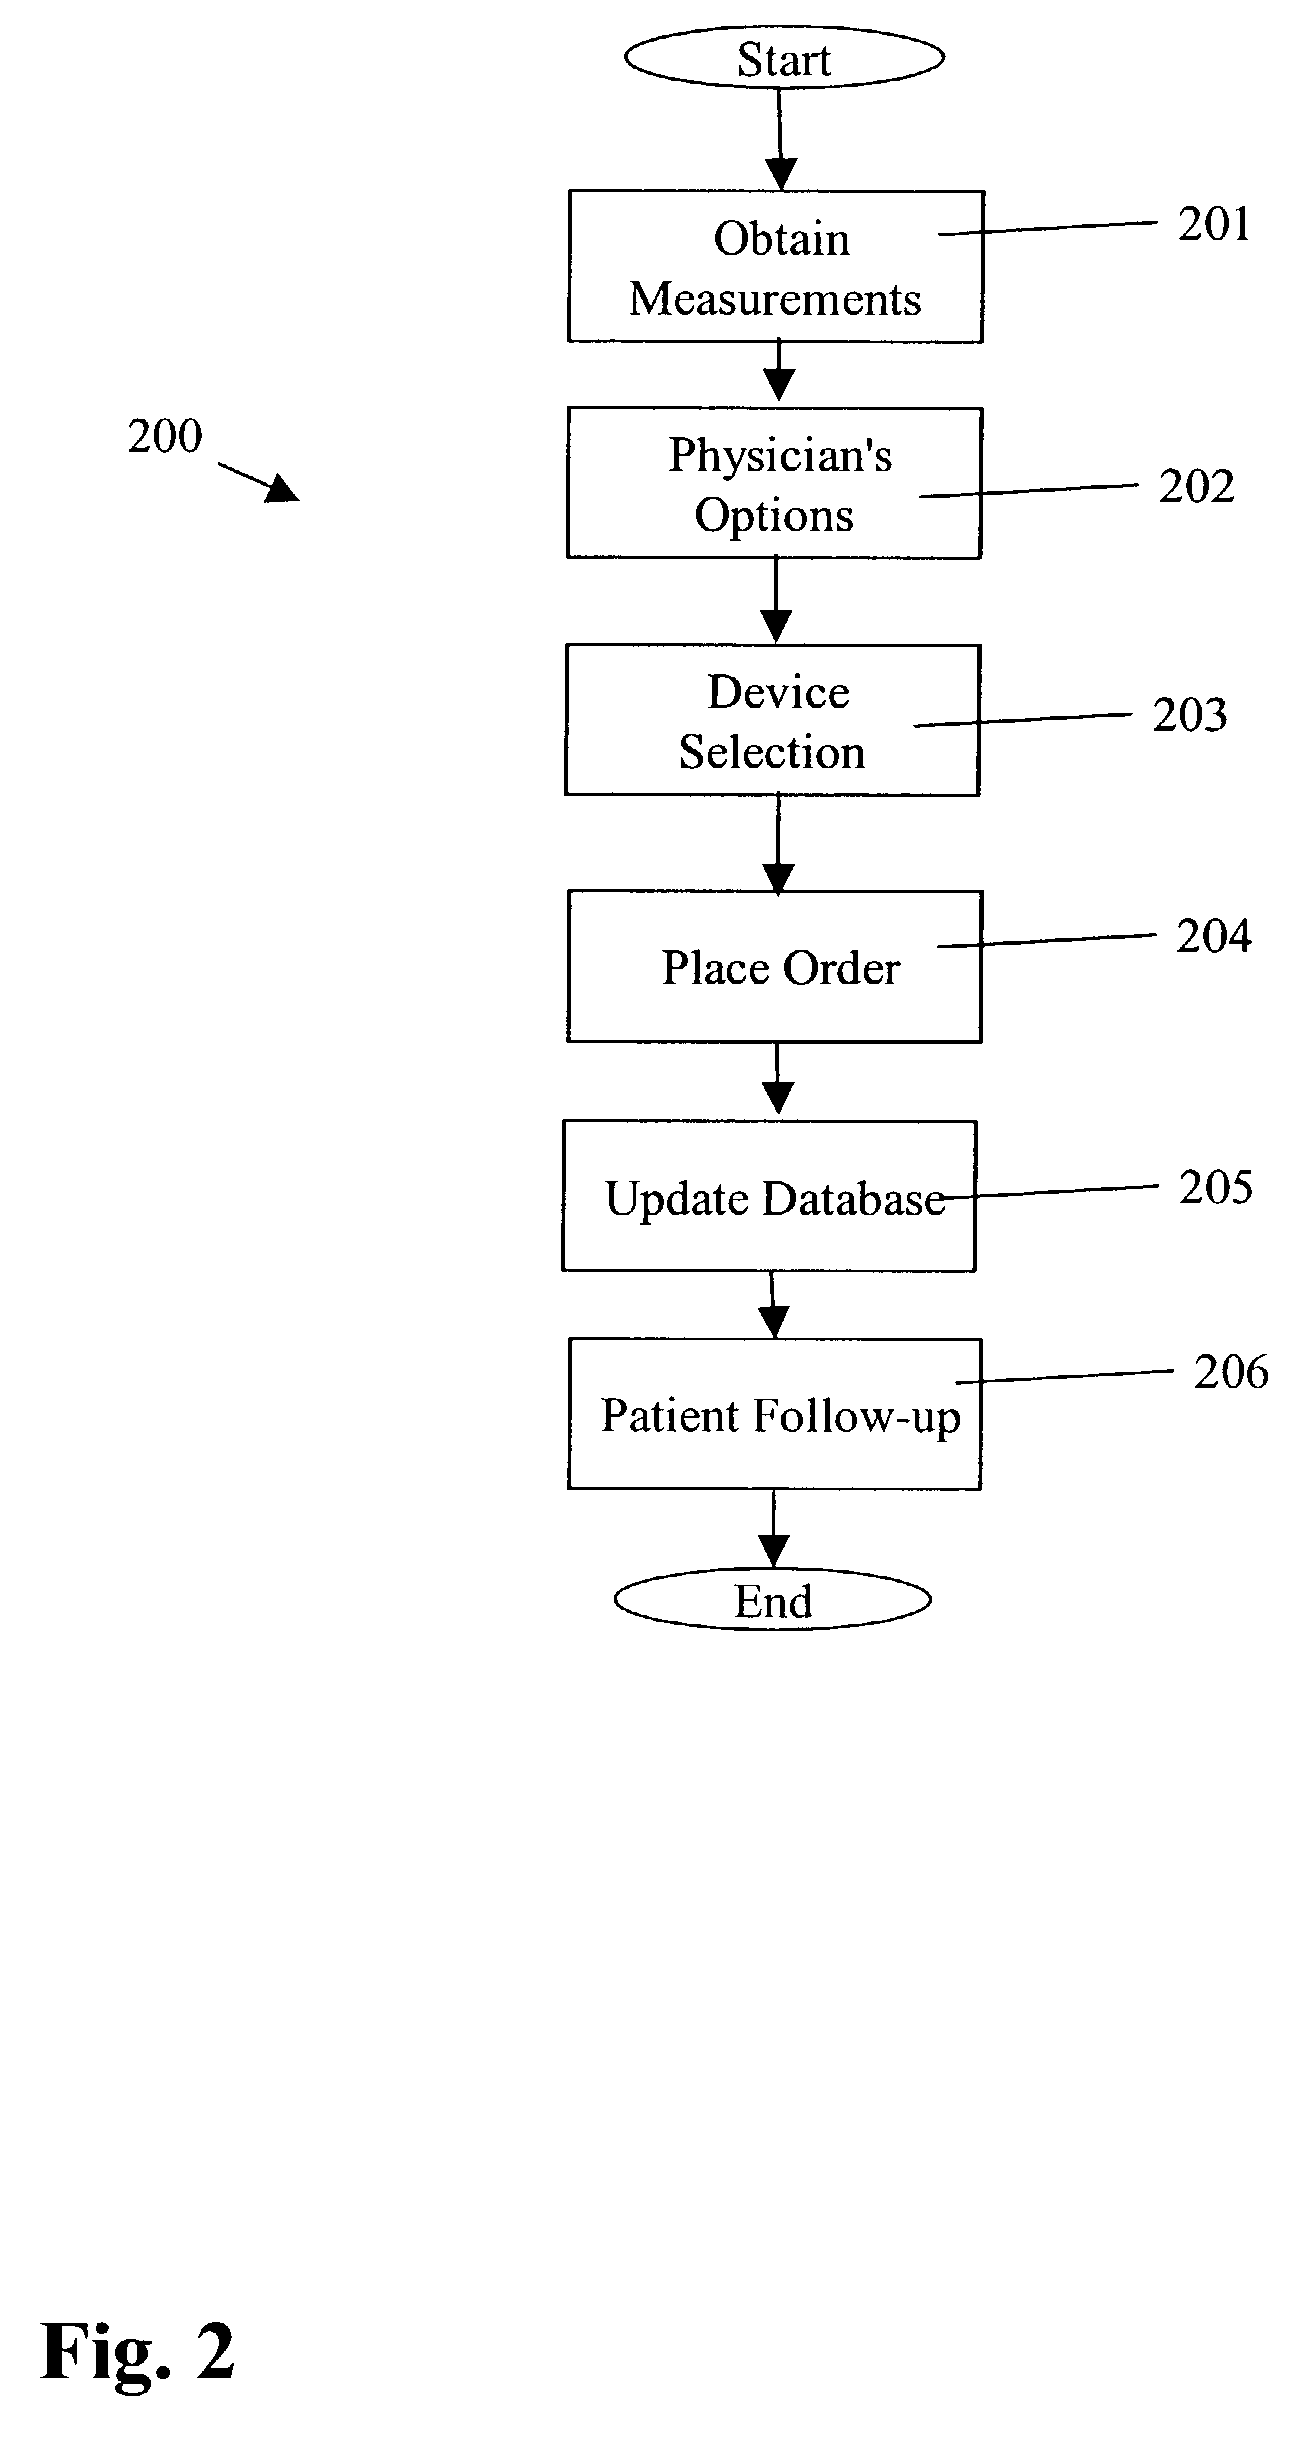 Computer-based methods and structures for stent-graft selection